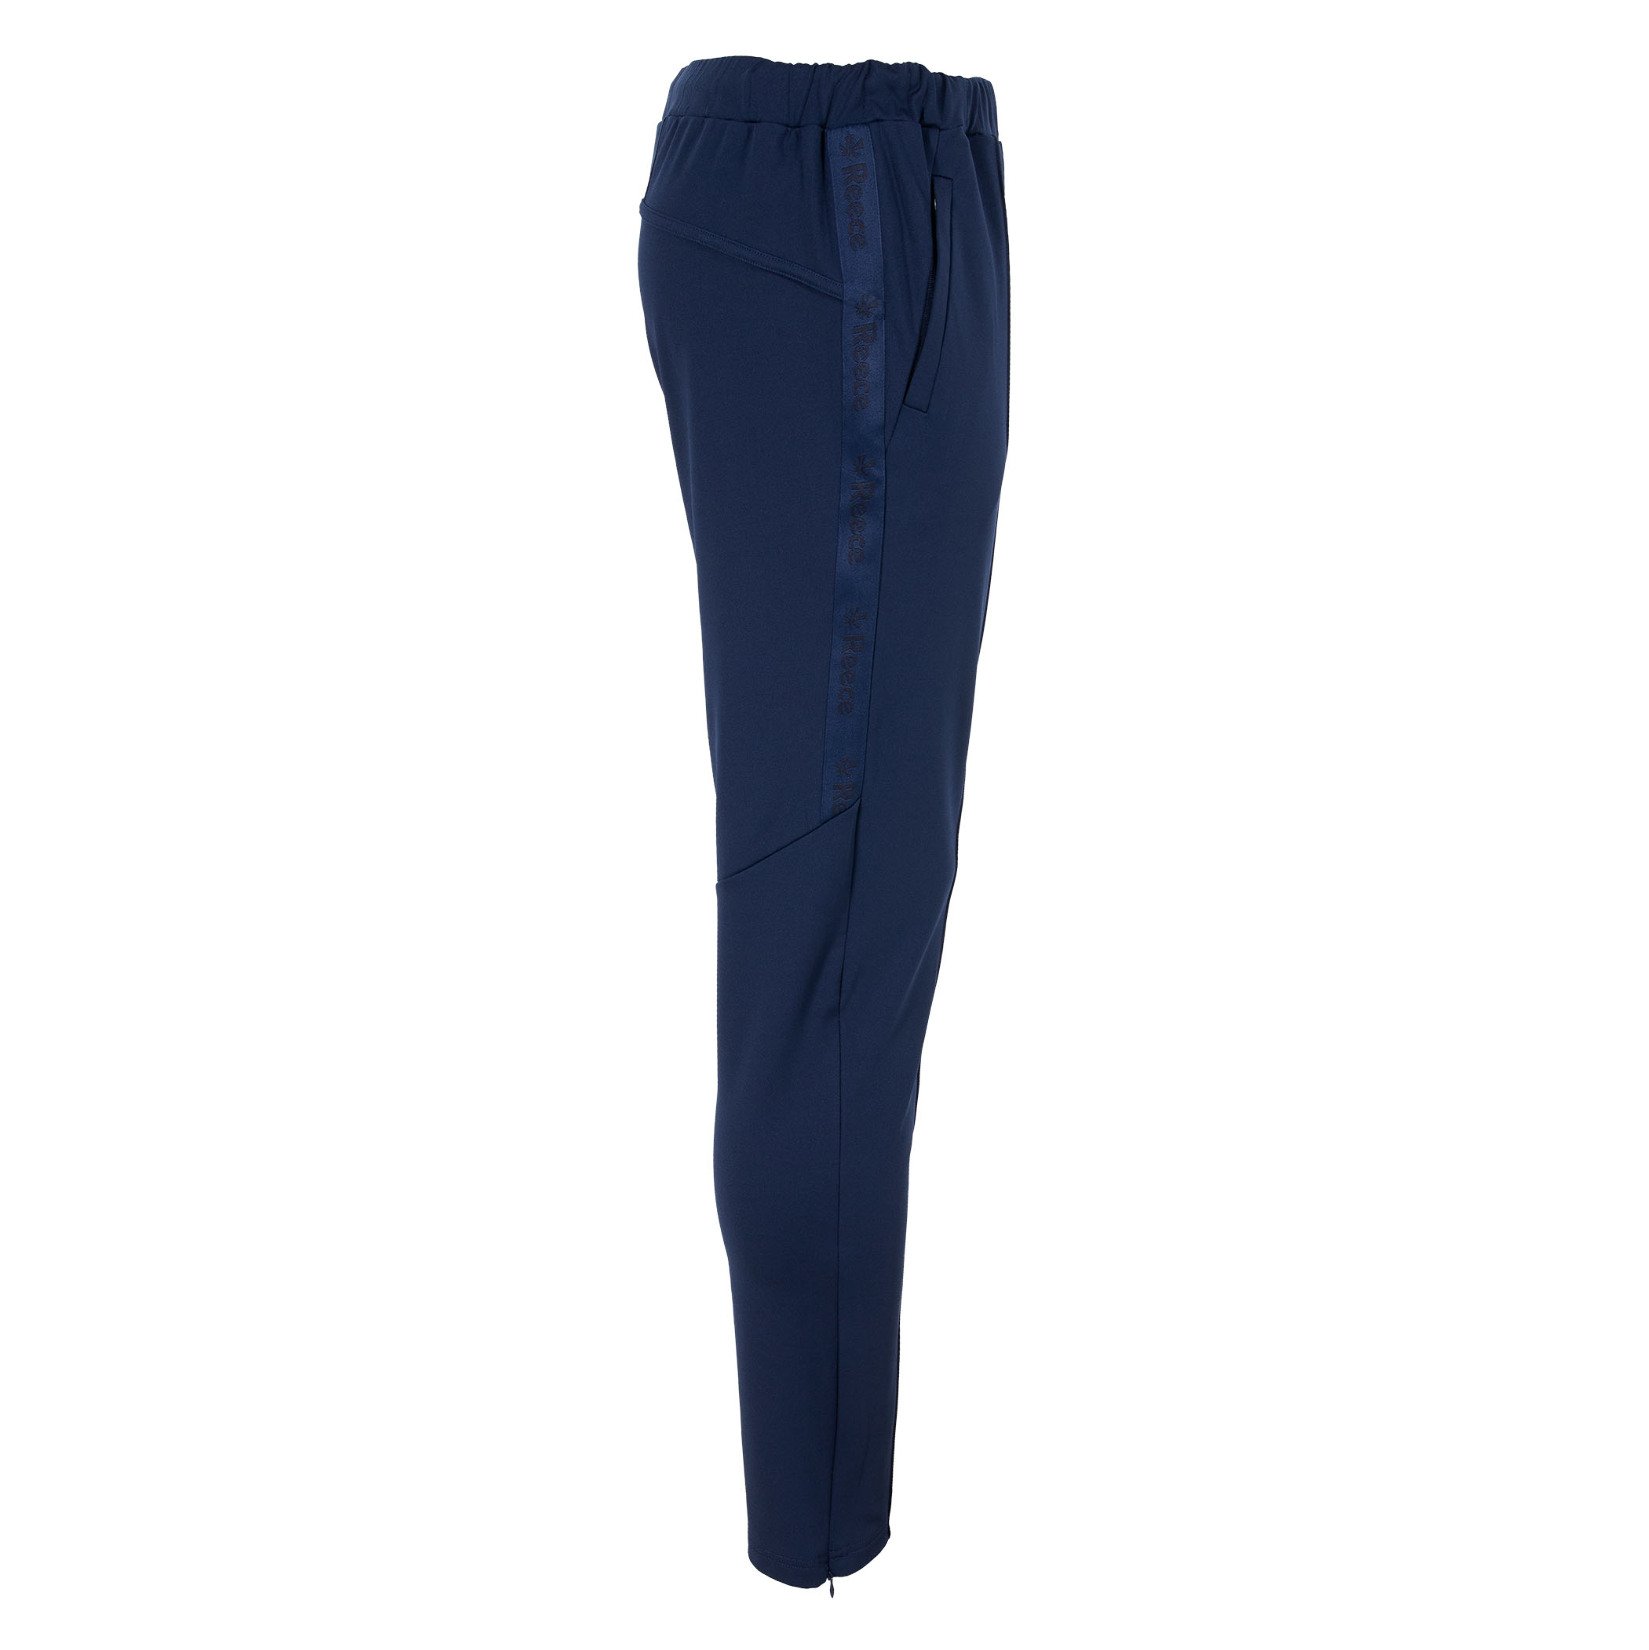 Reece Cleve Stretched Fit Pants